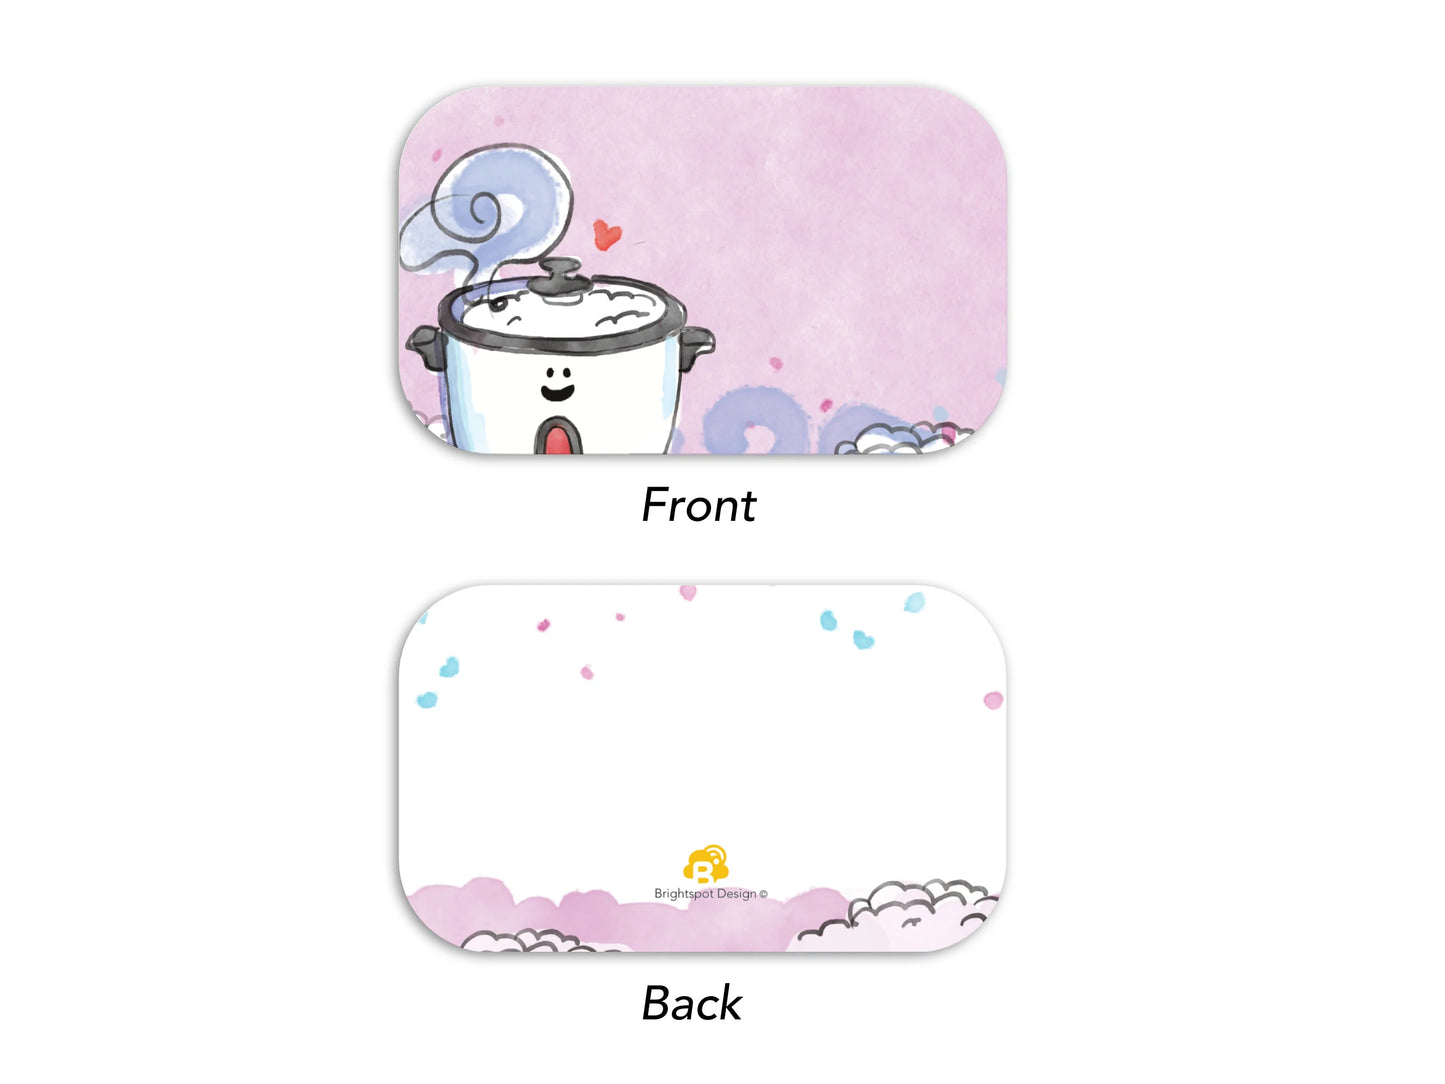 Rice Cooker Stationery Note Cards, Washi, and Enamel Pin Gift Set